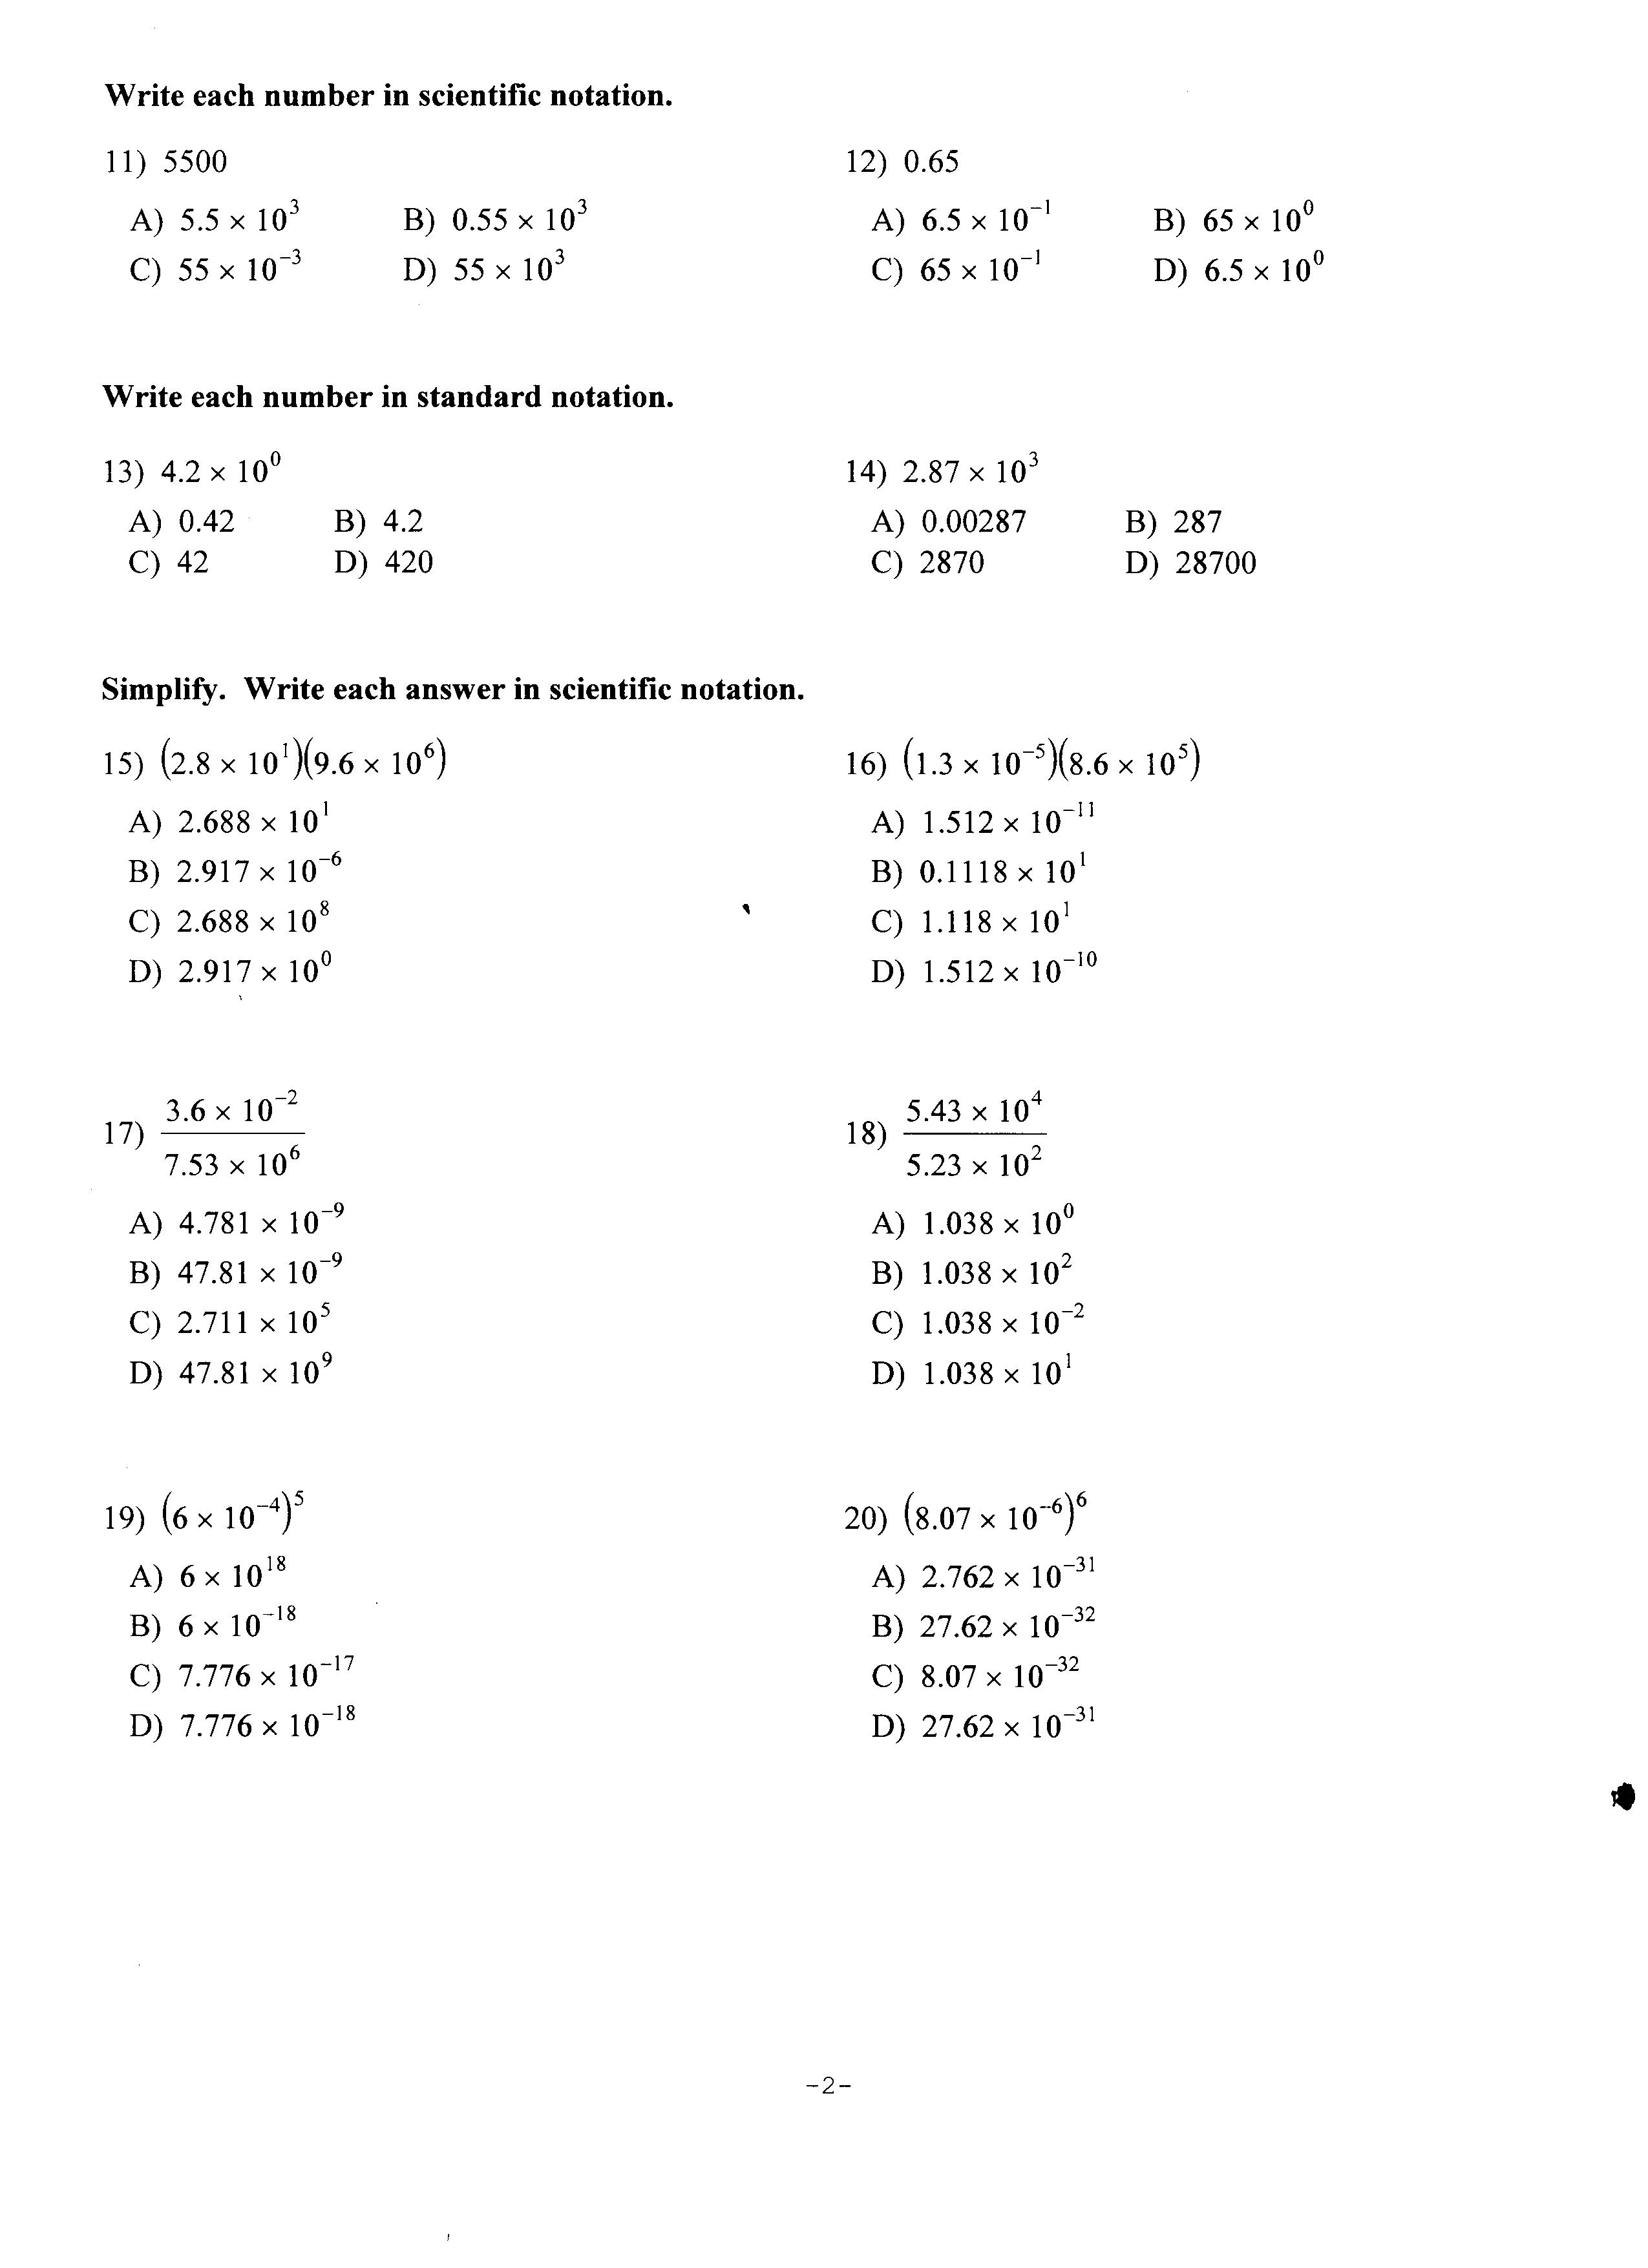 unit exponents and scientific notation homework 1 properties of exponents